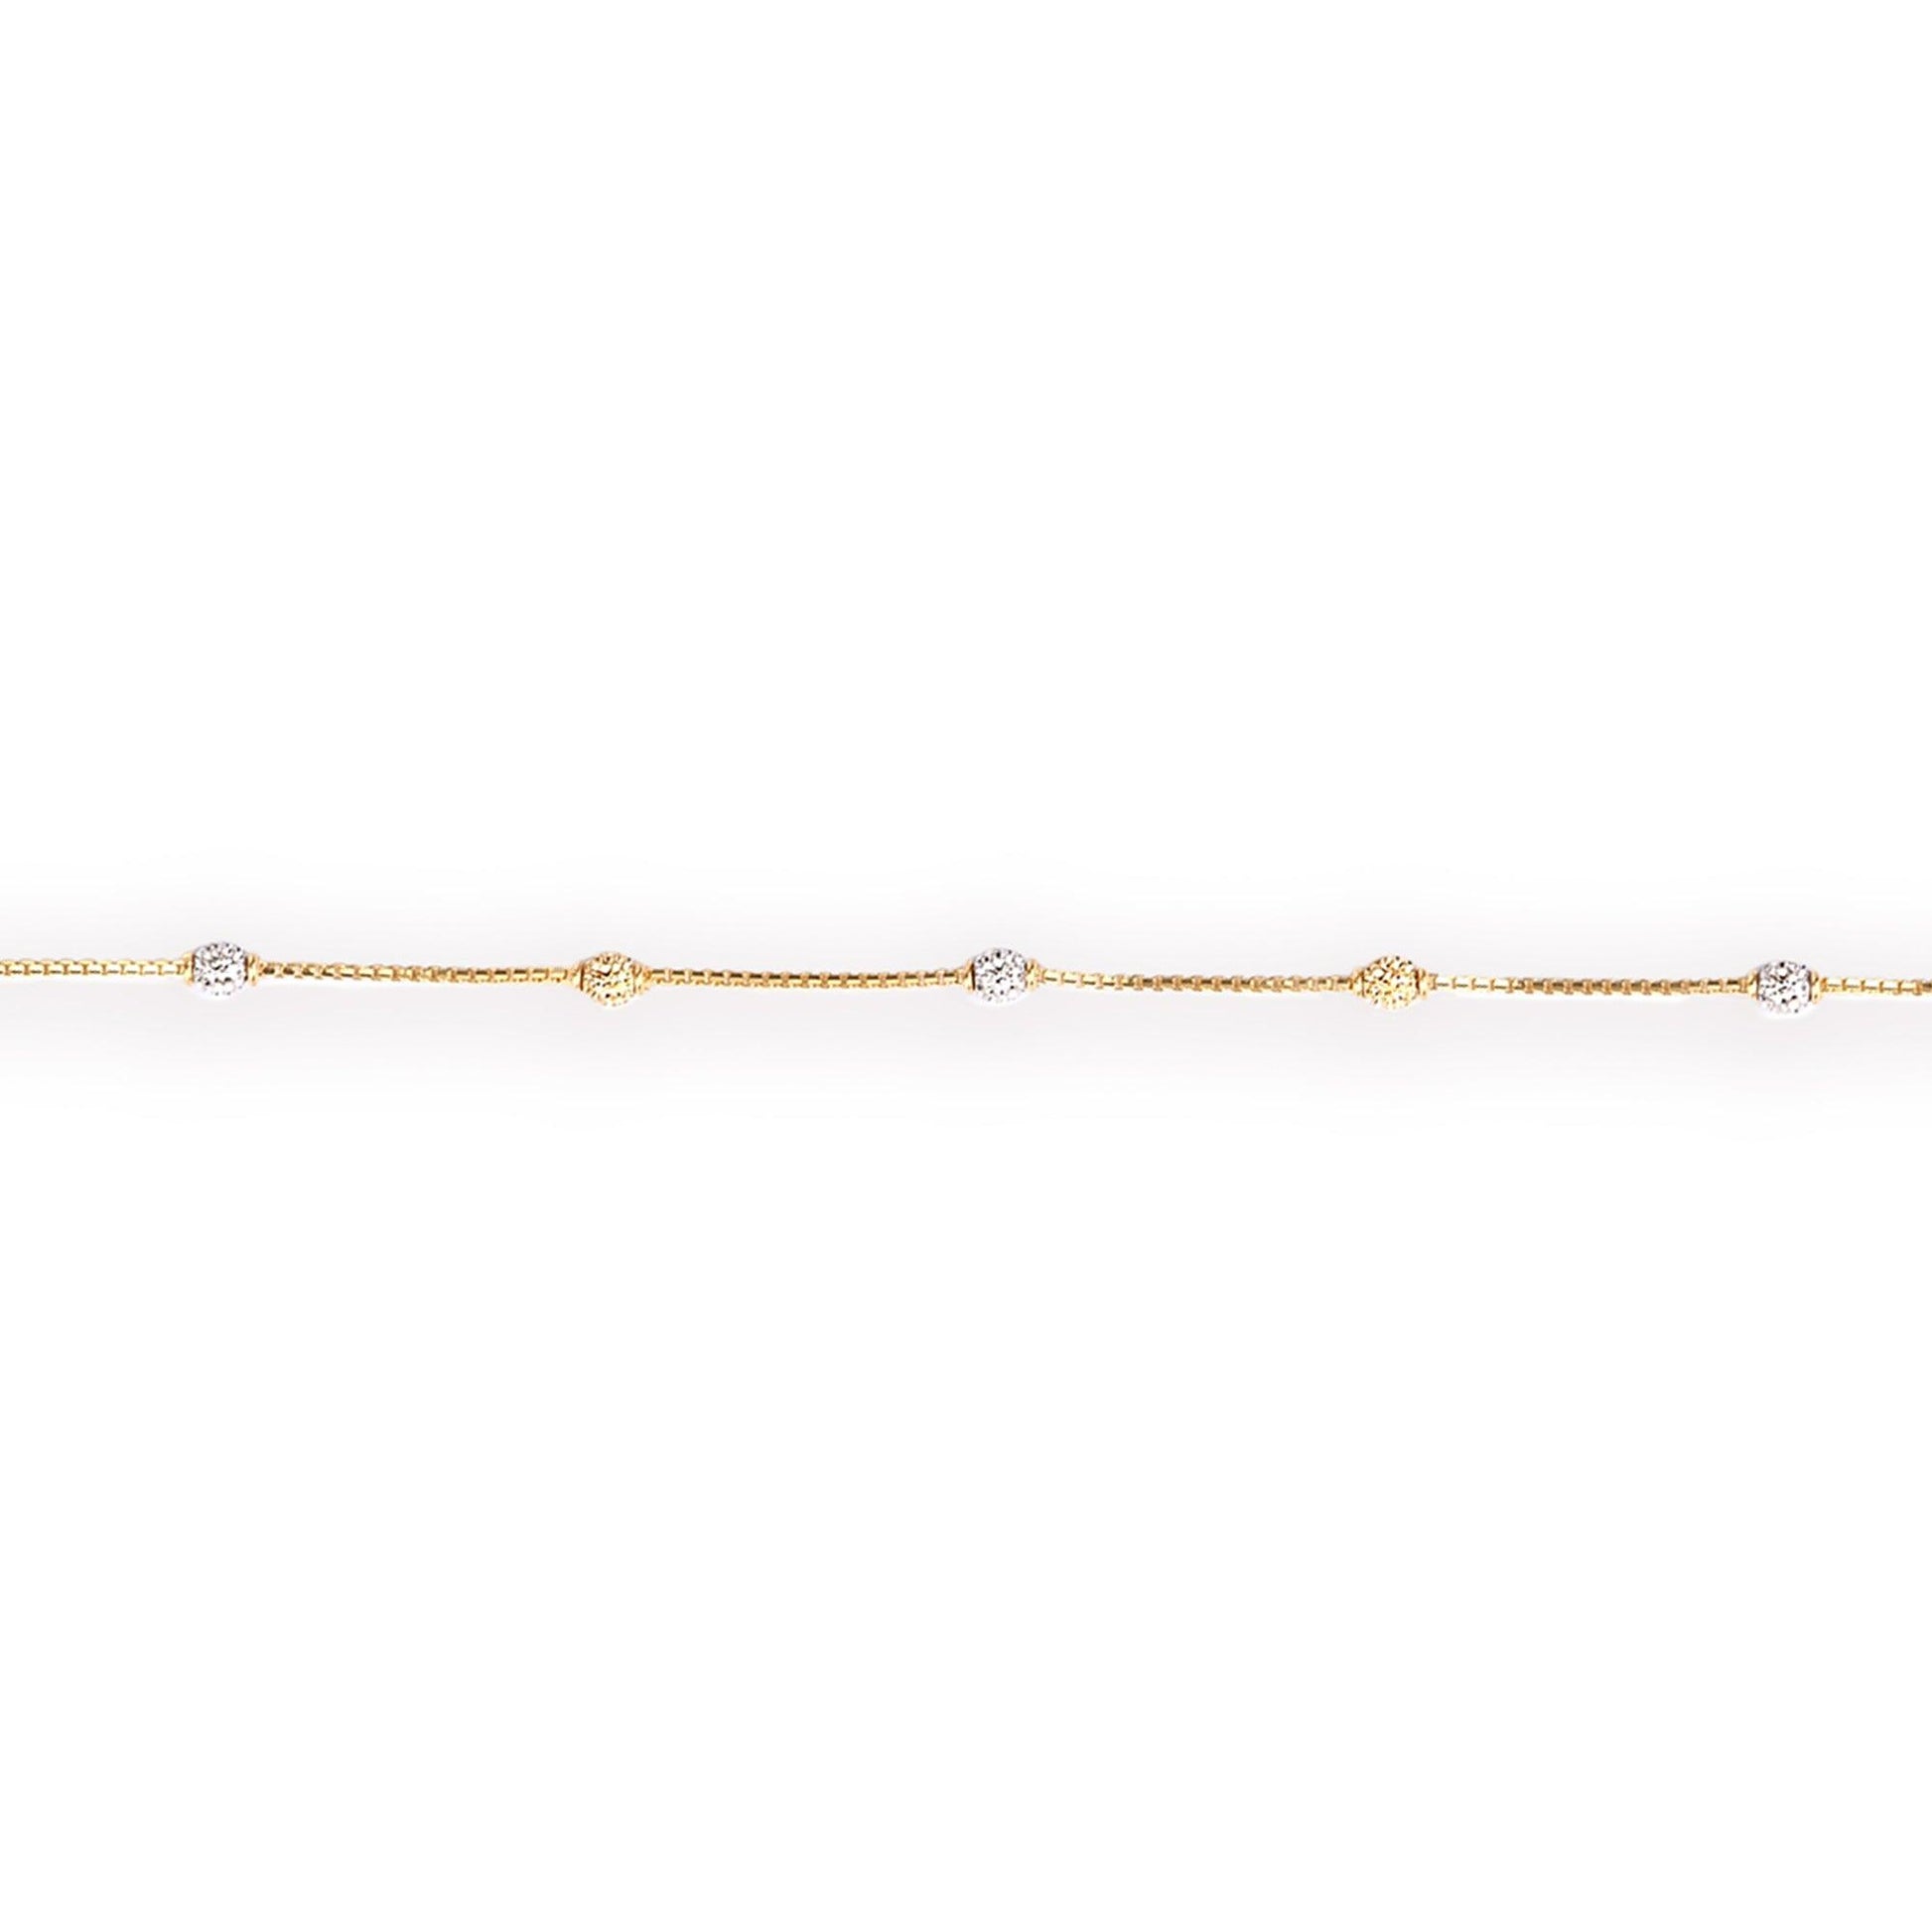 22ct Gold Box Chain Bracelet with Plain Gold and Rhodium Diamond Cut Gold Beads and Hook Clasp (3.2g) LBR-8479Rb - Minar Jewellers